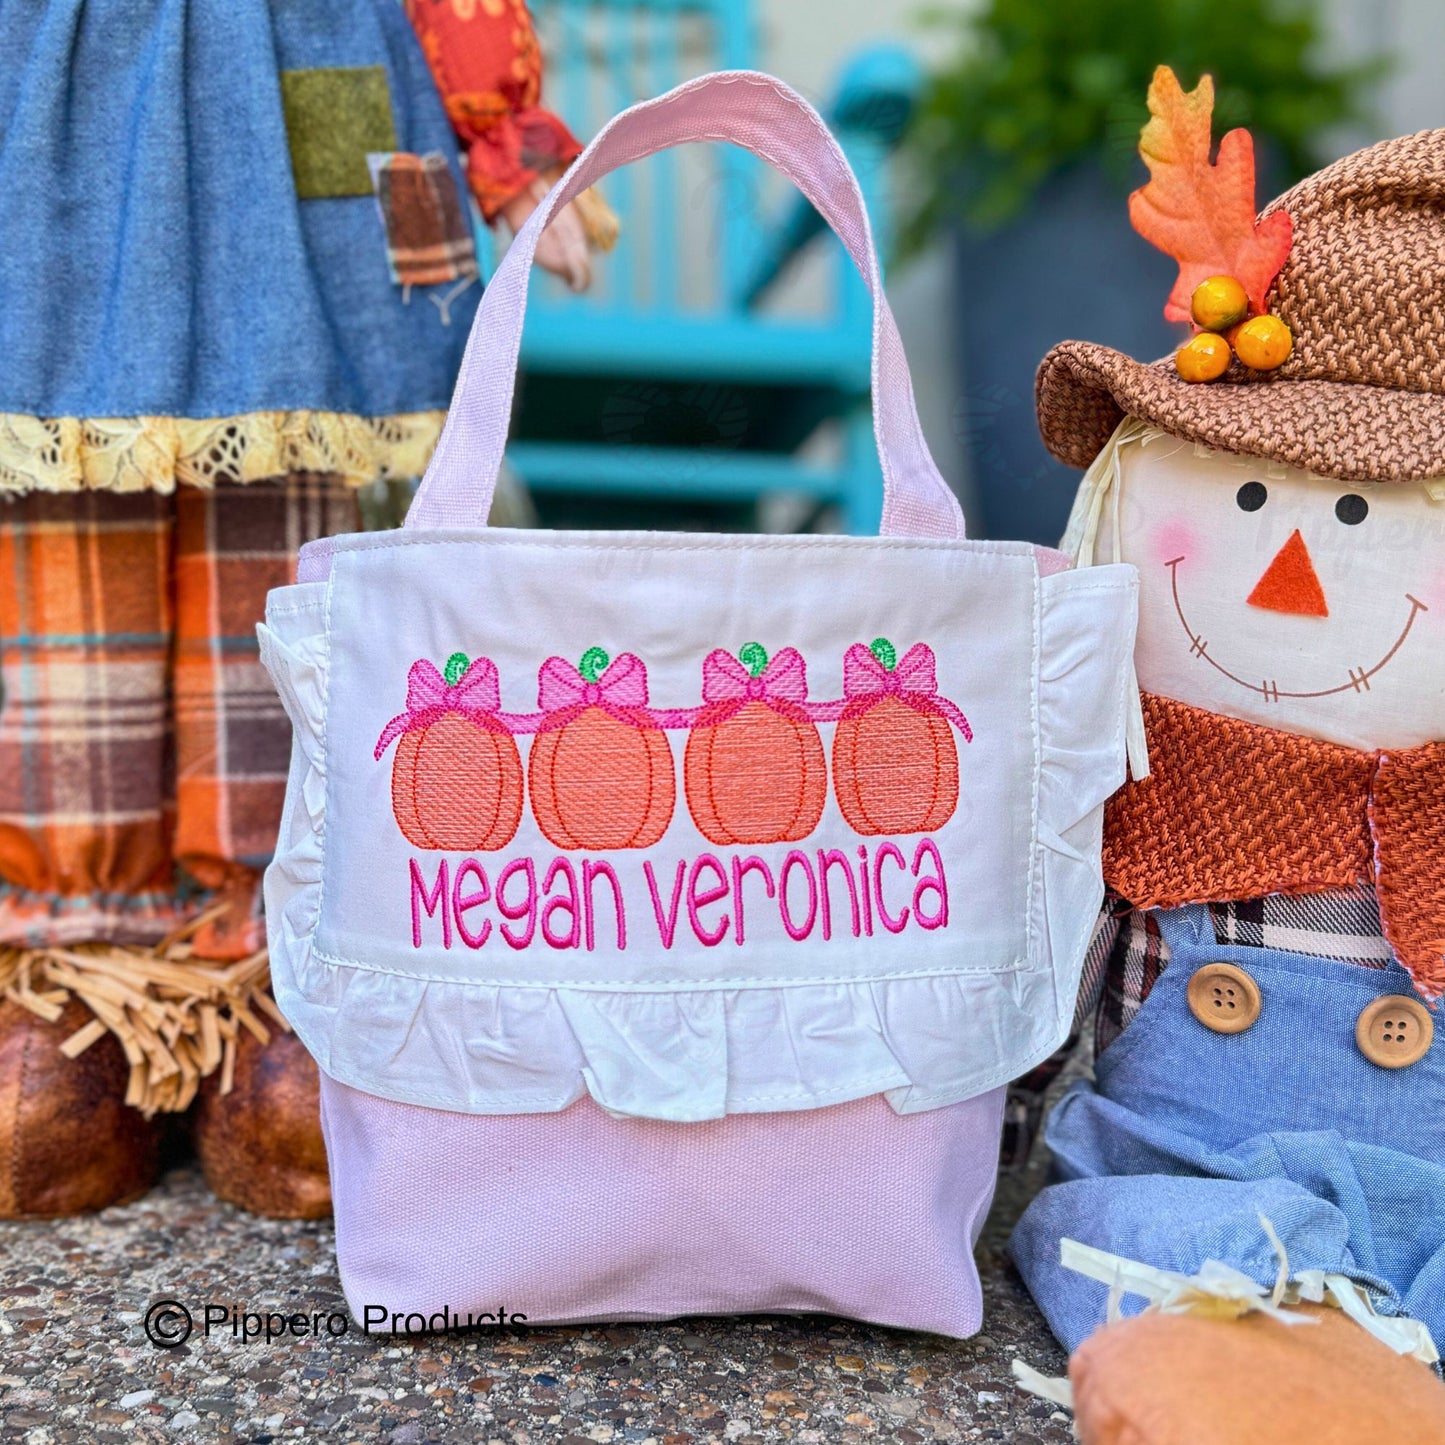 Personalized Embroidered Small Trick or Treat Halloween Candy Bag Basket Bucket Tote with Pumpkin Design Gift for Boy or Girl